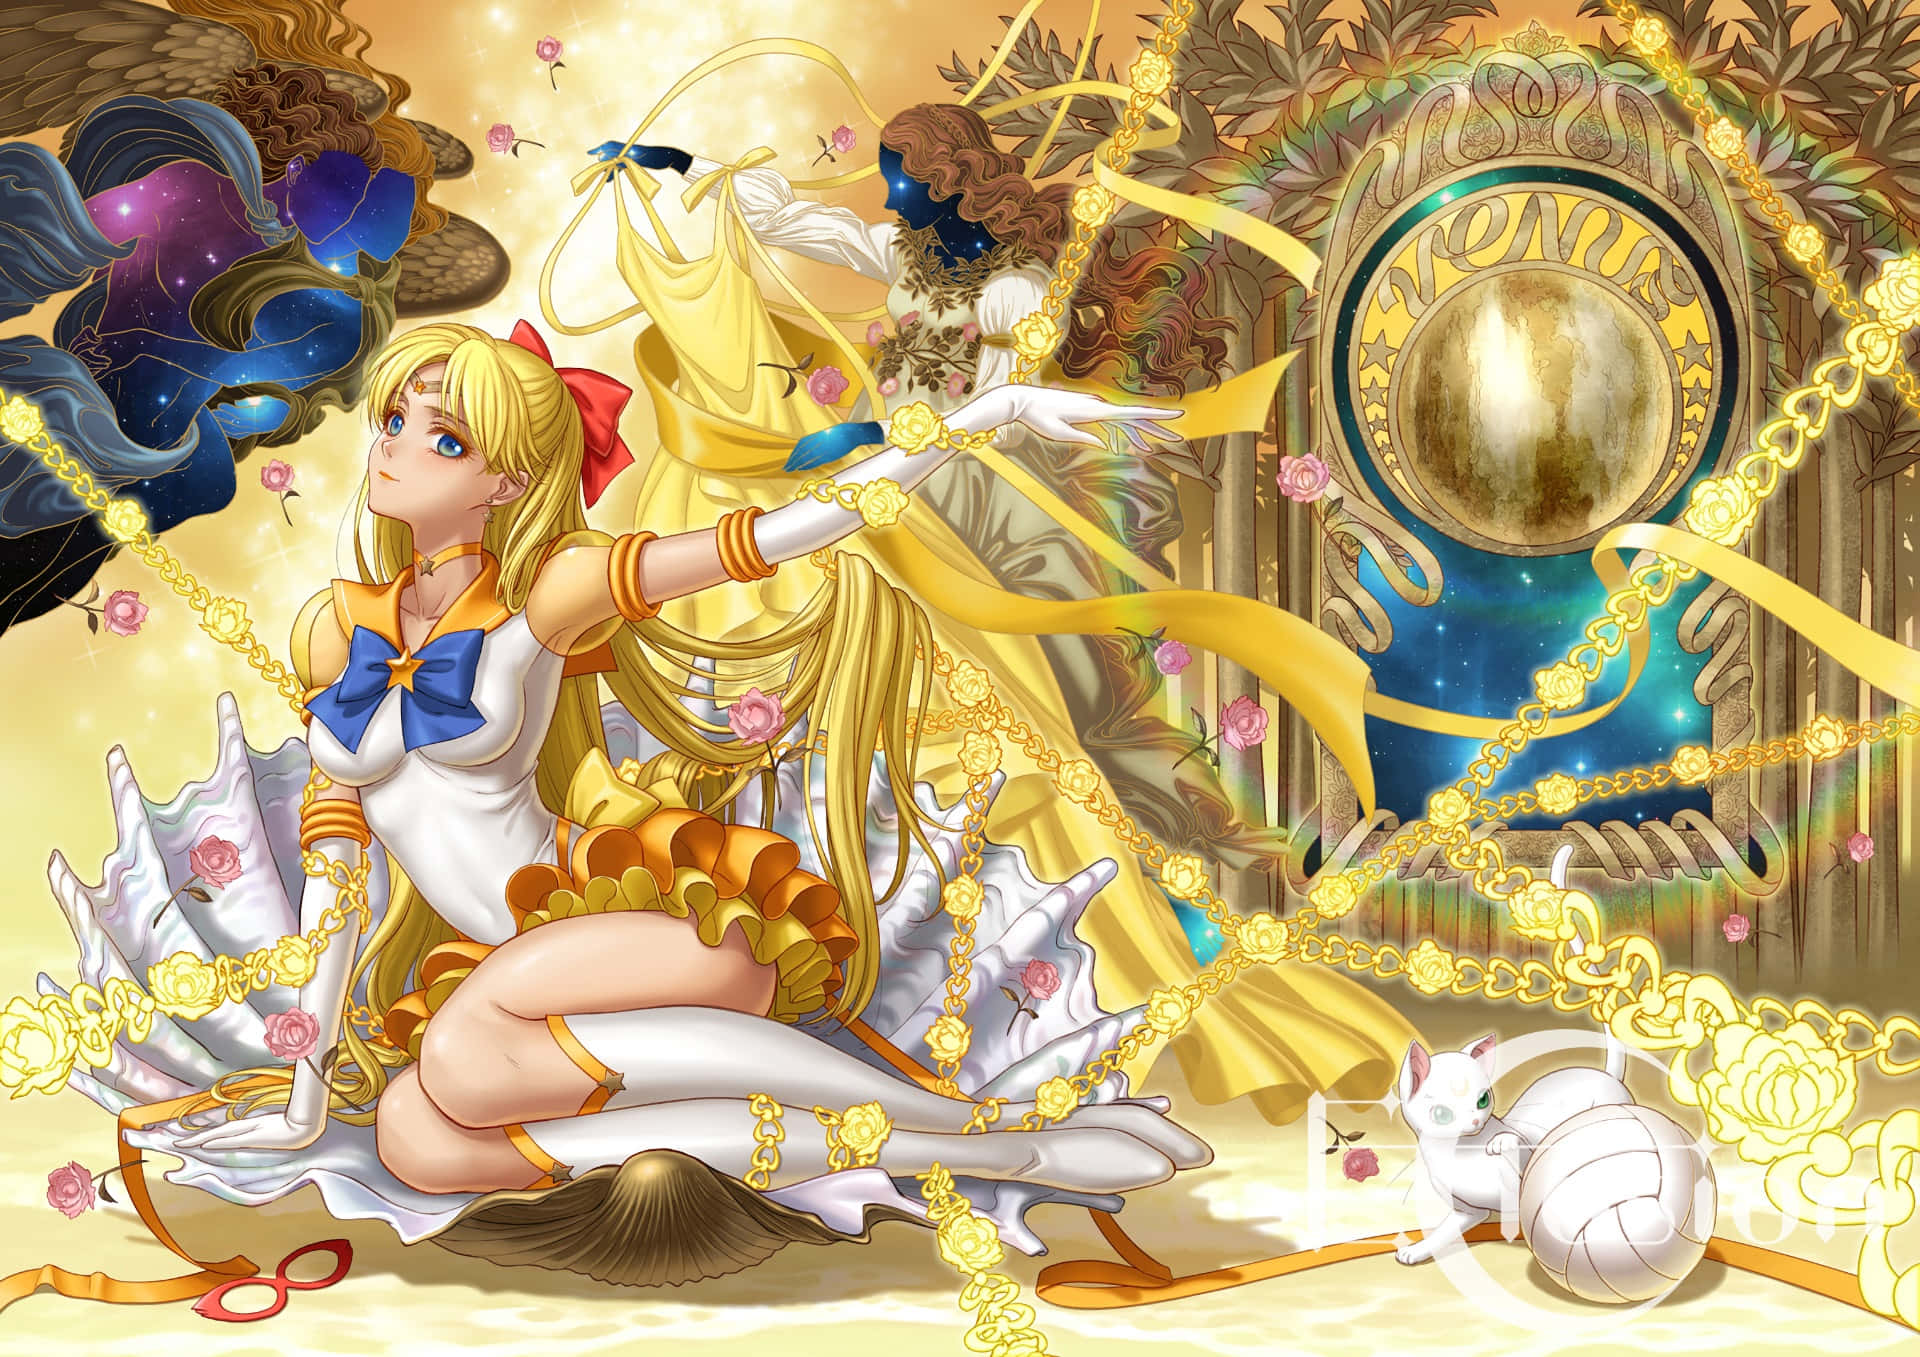 "Sailor Moon shows strength and beauty in the Sailor Moon Crystal anime series." Wallpaper